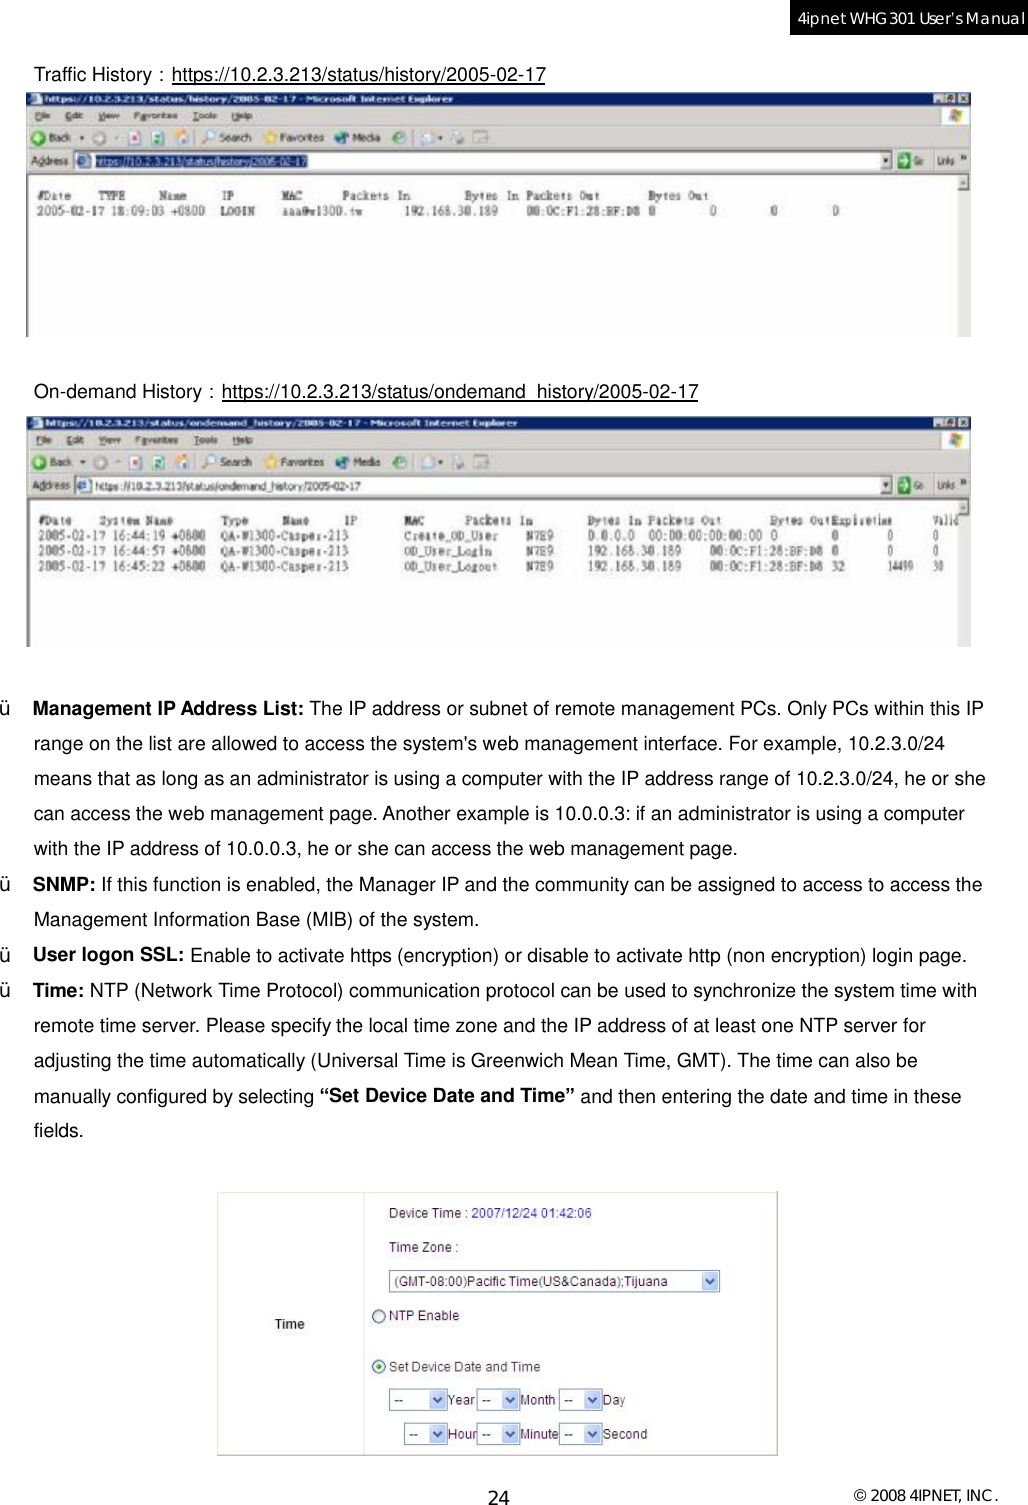  © 2008 4IPNET, INC. 24 4ipnet WHG301 User’s Manual  Traffic History：https://10.2.3.213/status/history/2005-02-17   On-demand History：https://10.2.3.213/status/ondemand_history/2005-02-17   Ÿ  Management IP Address List: The IP address or subnet of remote management PCs. Only PCs within this IP range on the list are allowed to access the system&apos;s web management interface. For example, 10.2.3.0/24 means that as long as an administrator is using a computer with the IP address range of 10.2.3.0/24, he or she can access the web management page. Another example is 10.0.0.3: if an administrator is using a computer with the IP address of 10.0.0.3, he or she can access the web management page.  Ÿ  SNMP: If this function is enabled, the Manager IP and the community can be assigned to access to access the Management Information Base (MIB) of the system. Ÿ  User logon SSL: Enable to activate https (encryption) or disable to activate http (non encryption) login page. Ÿ  Time: NTP (Network Time Protocol) communication protocol can be used to synchronize the system time with remote time server. Please specify the local time zone and the IP address of at least one NTP server for adjusting the time automatically (Universal Time is Greenwich Mean Time, GMT). The time can also be manually configured by selecting “Set Device Date and Time” and then entering the date and time in these fields.   